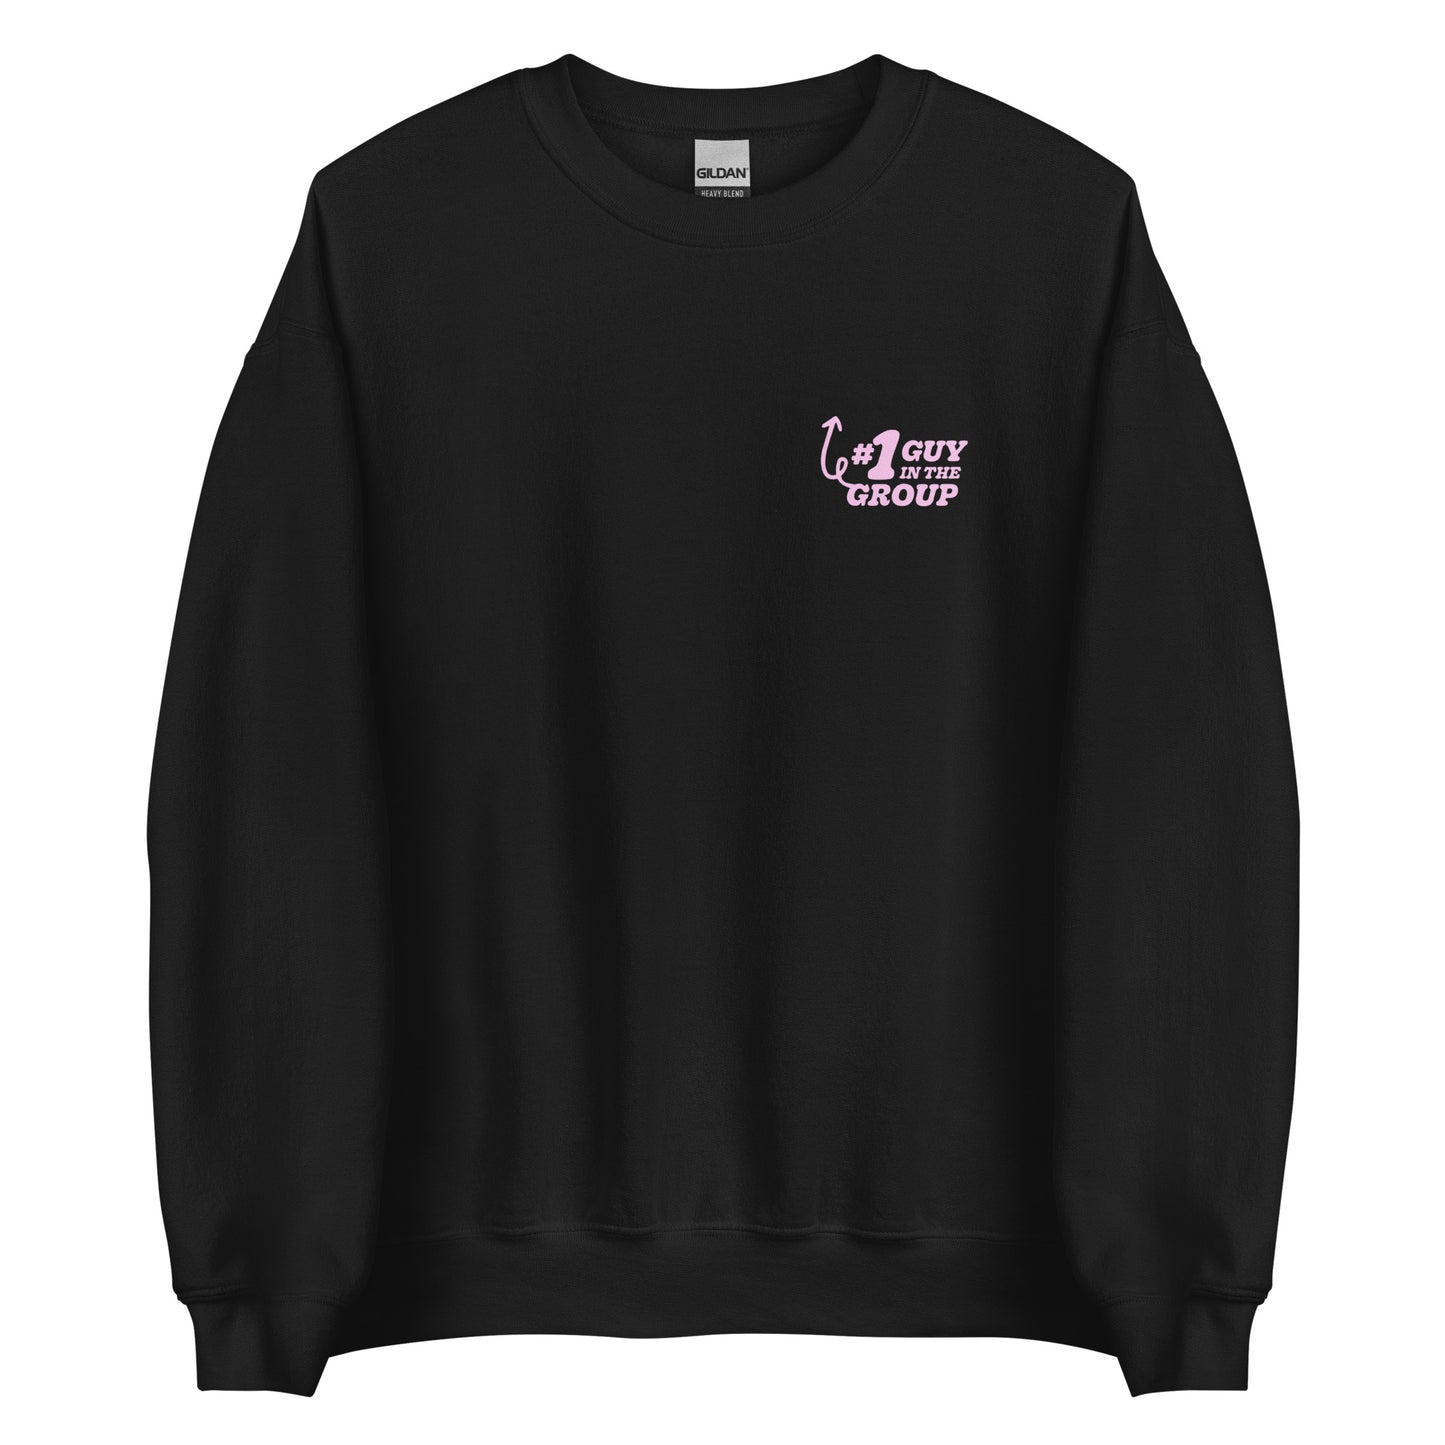 #1 Guy in the Group Crewneck